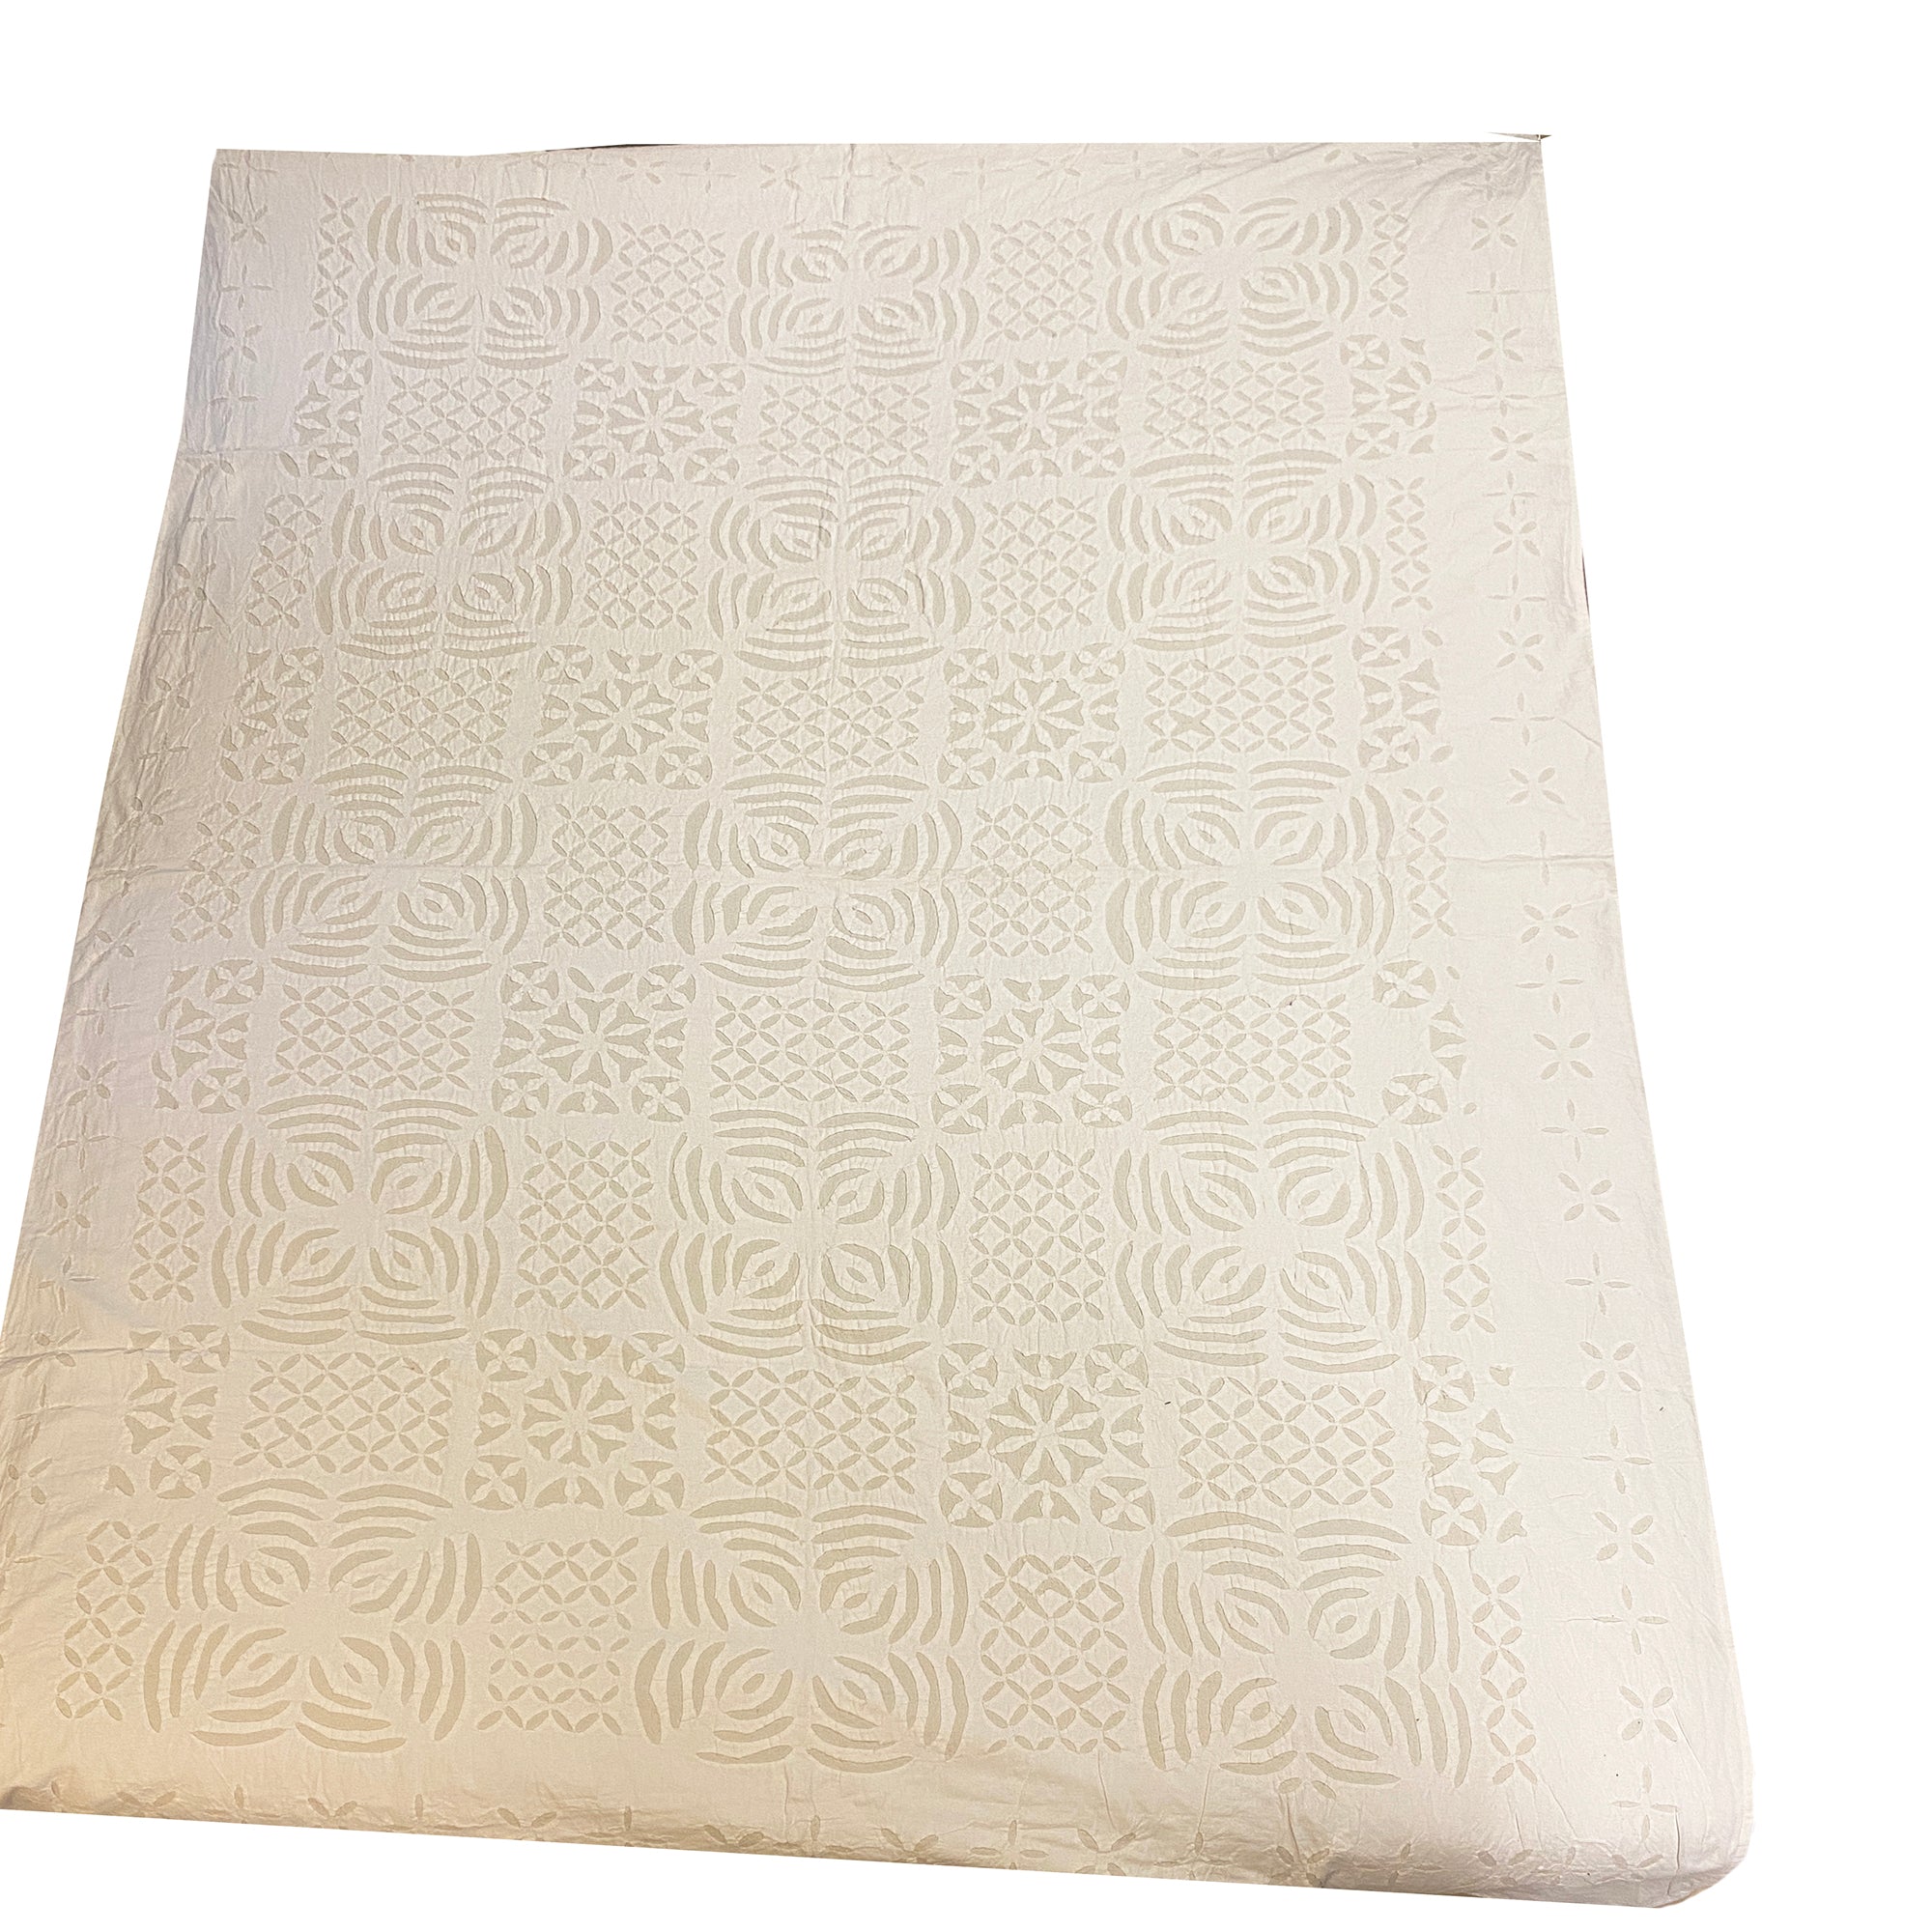 JM White on White Cut Out Bed Cover - Vintage India NYC